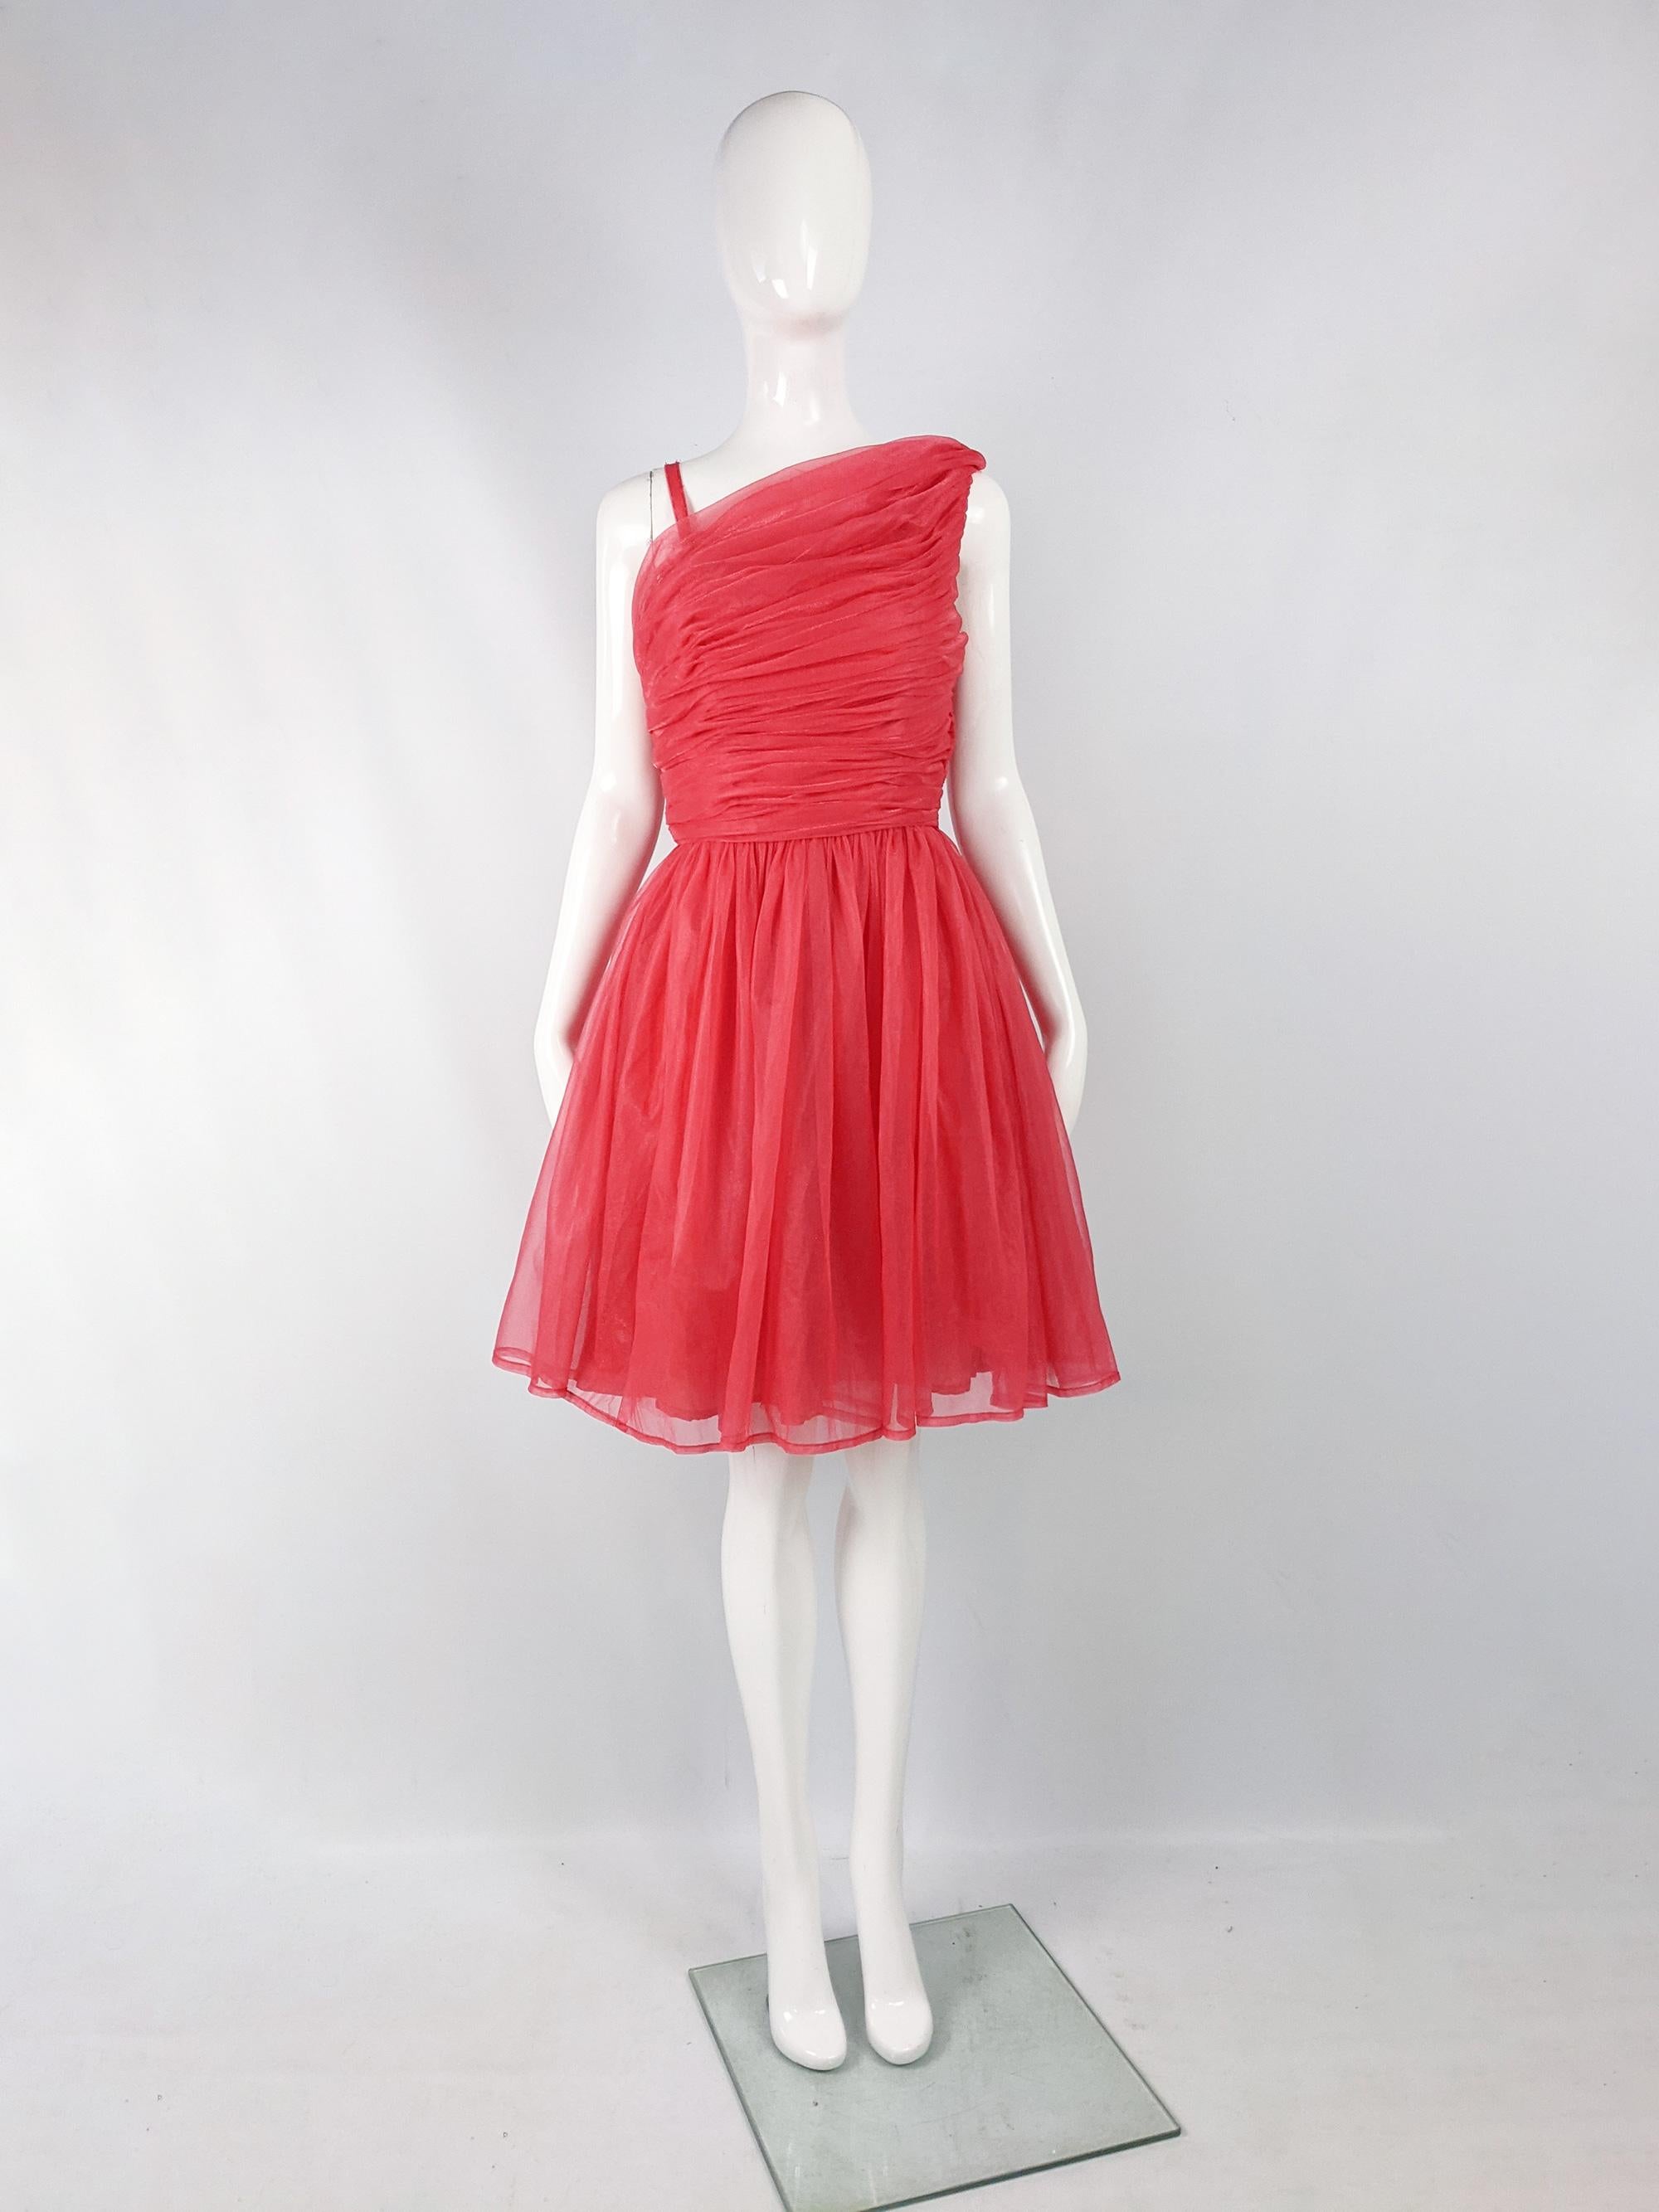 A fabulous vintage party dress from the early 60s by quality British designer, Norman Young. In a coral pink chiffon / organza fabric with ruching on the bodice, a full skirt and an asymmetric design on top. Perfect for an evening event. 

Size: